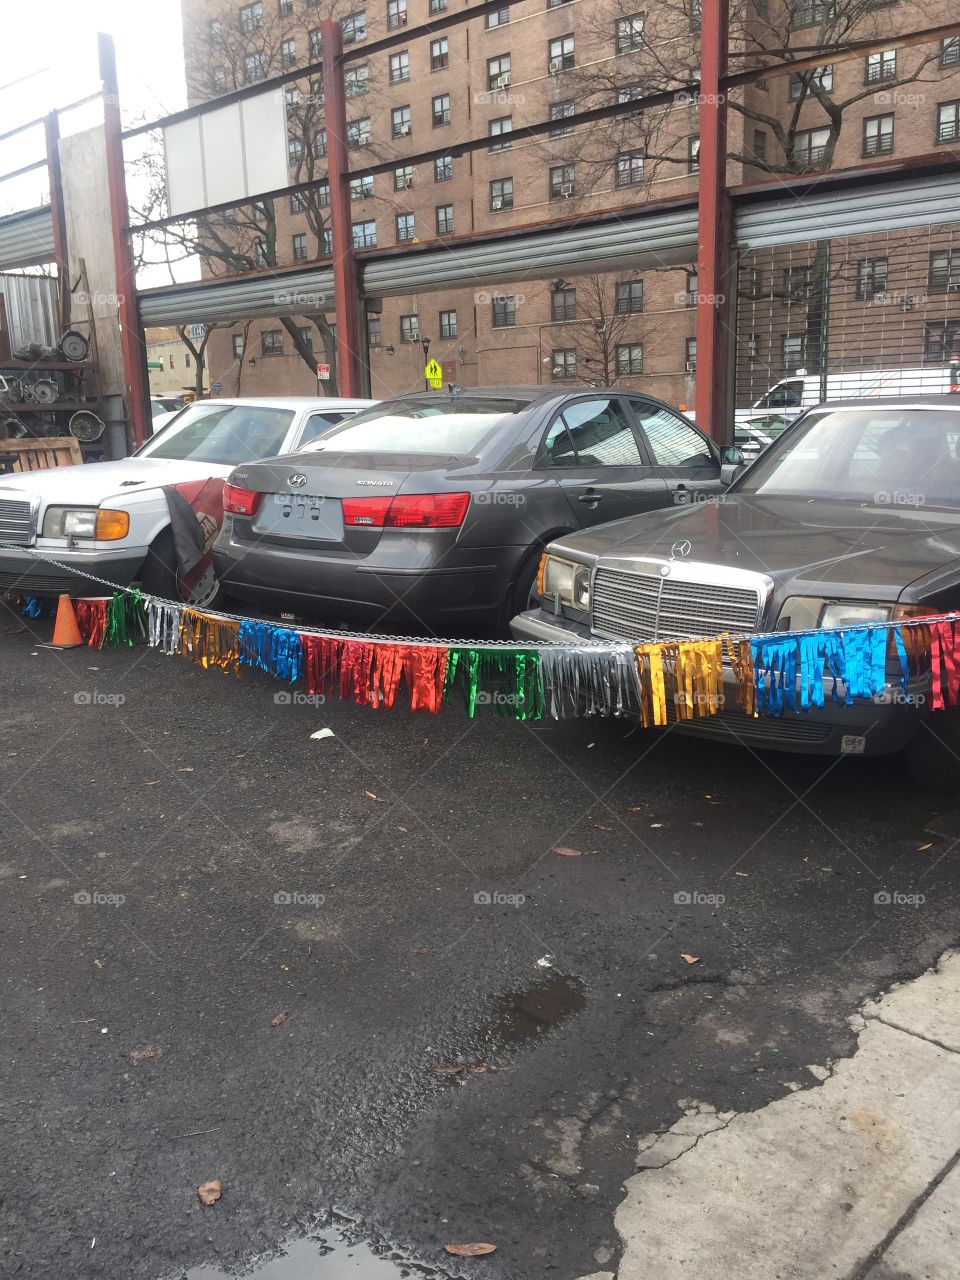 Used car party